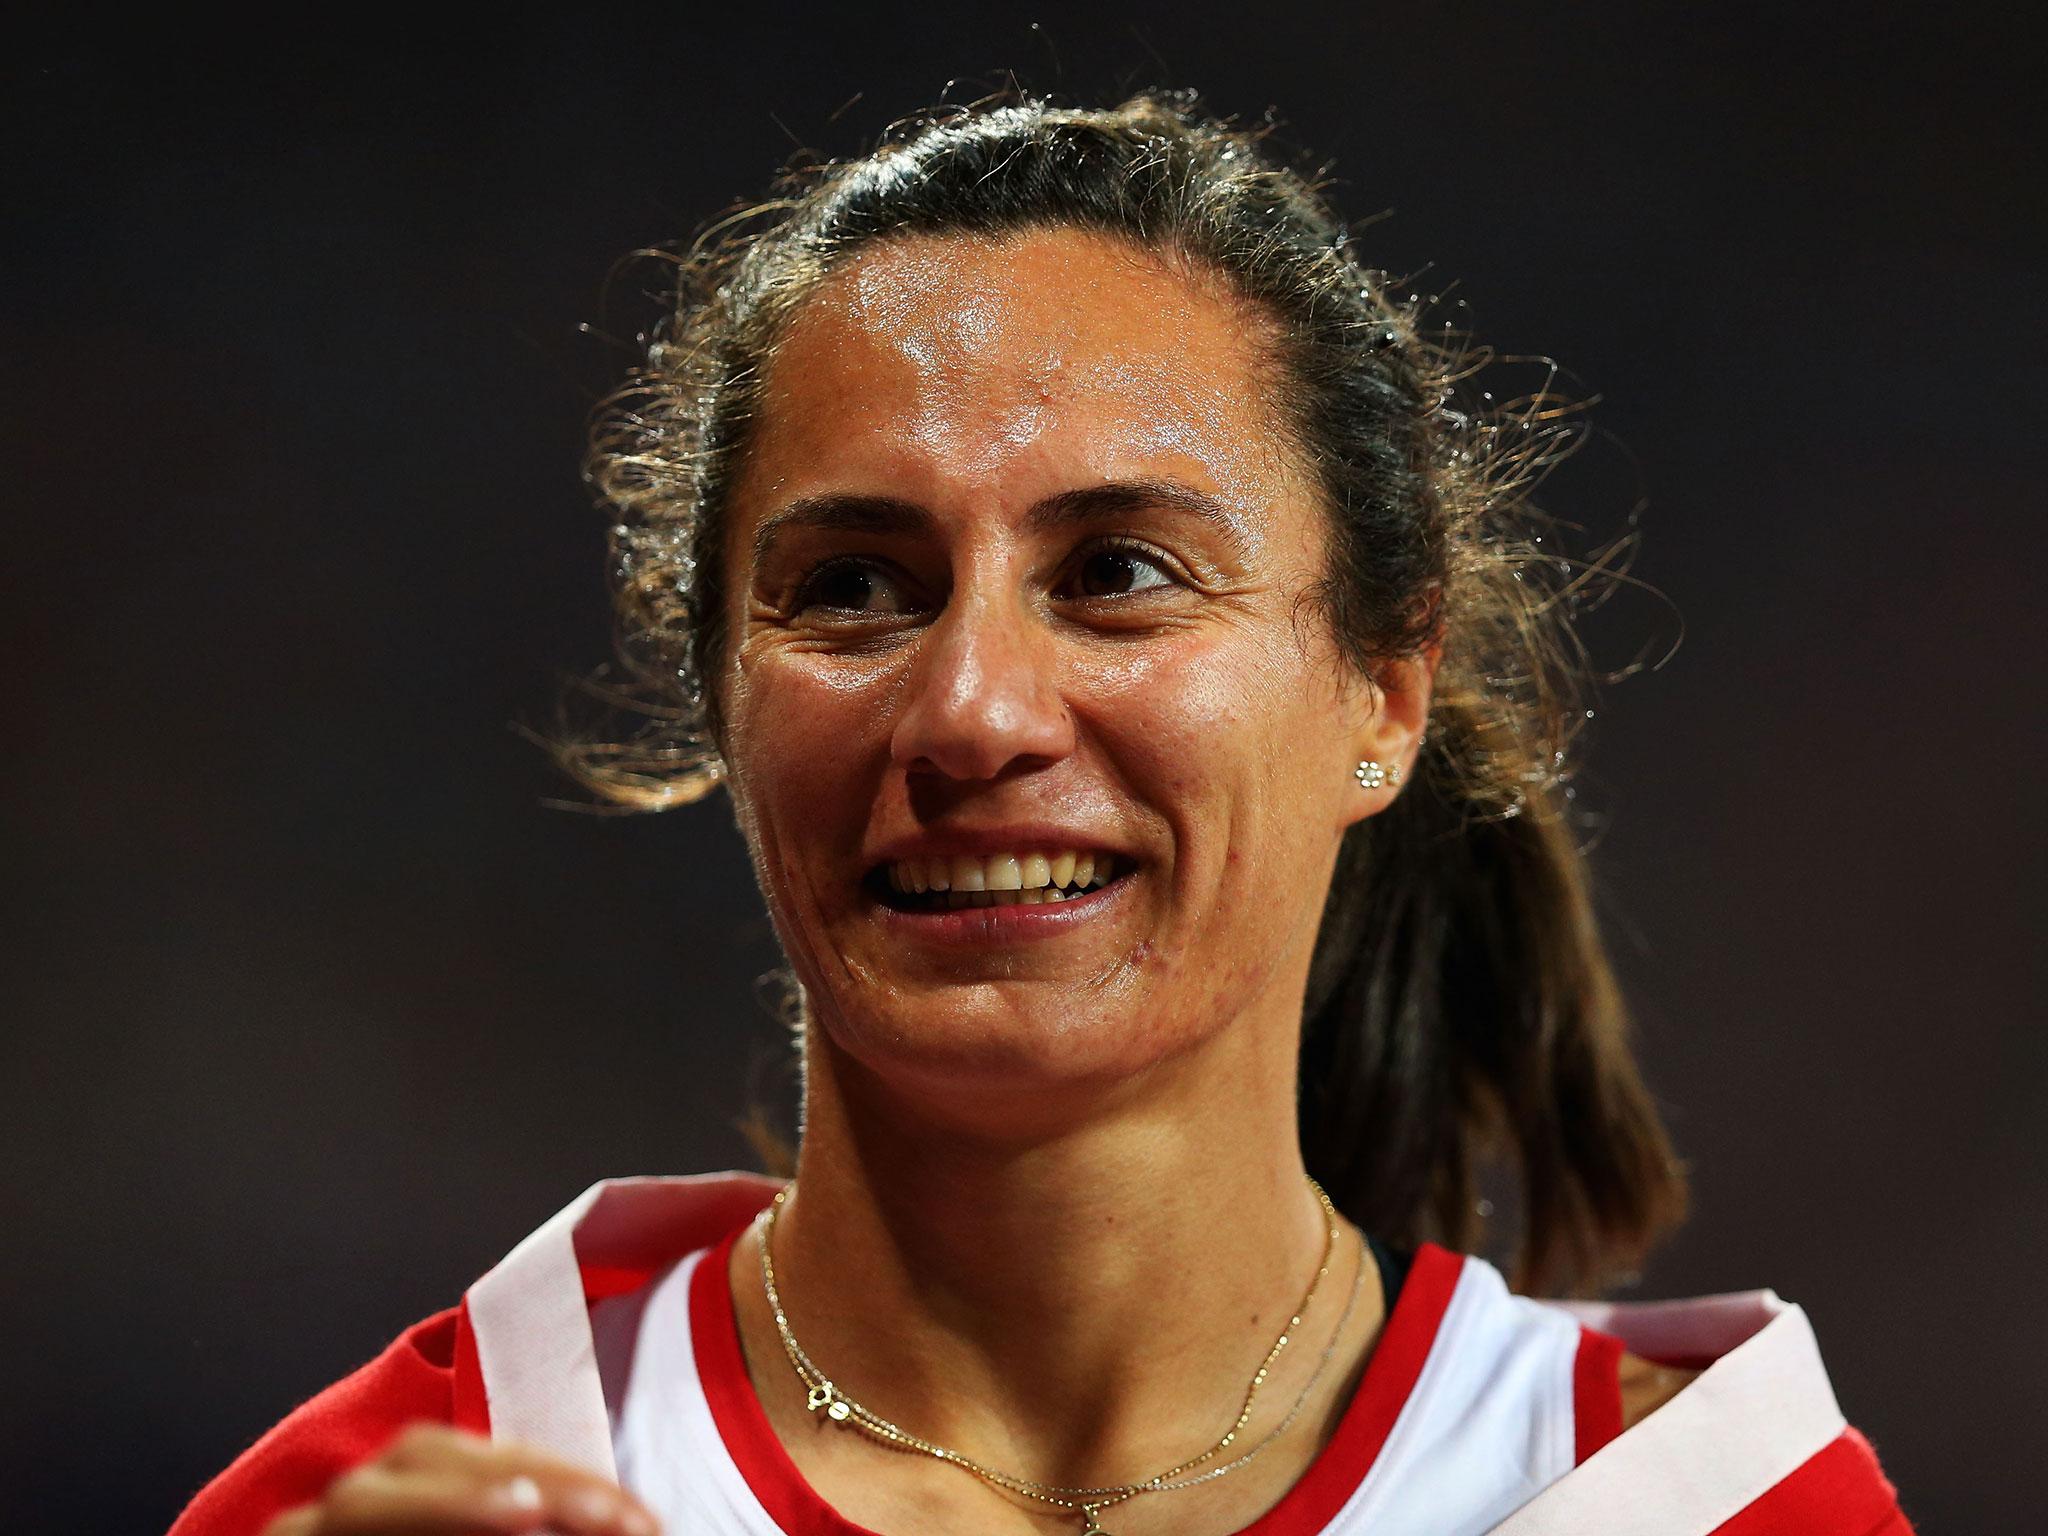 The 32-year-old was stripped of both her Olympic and European 1500m titles in 2015